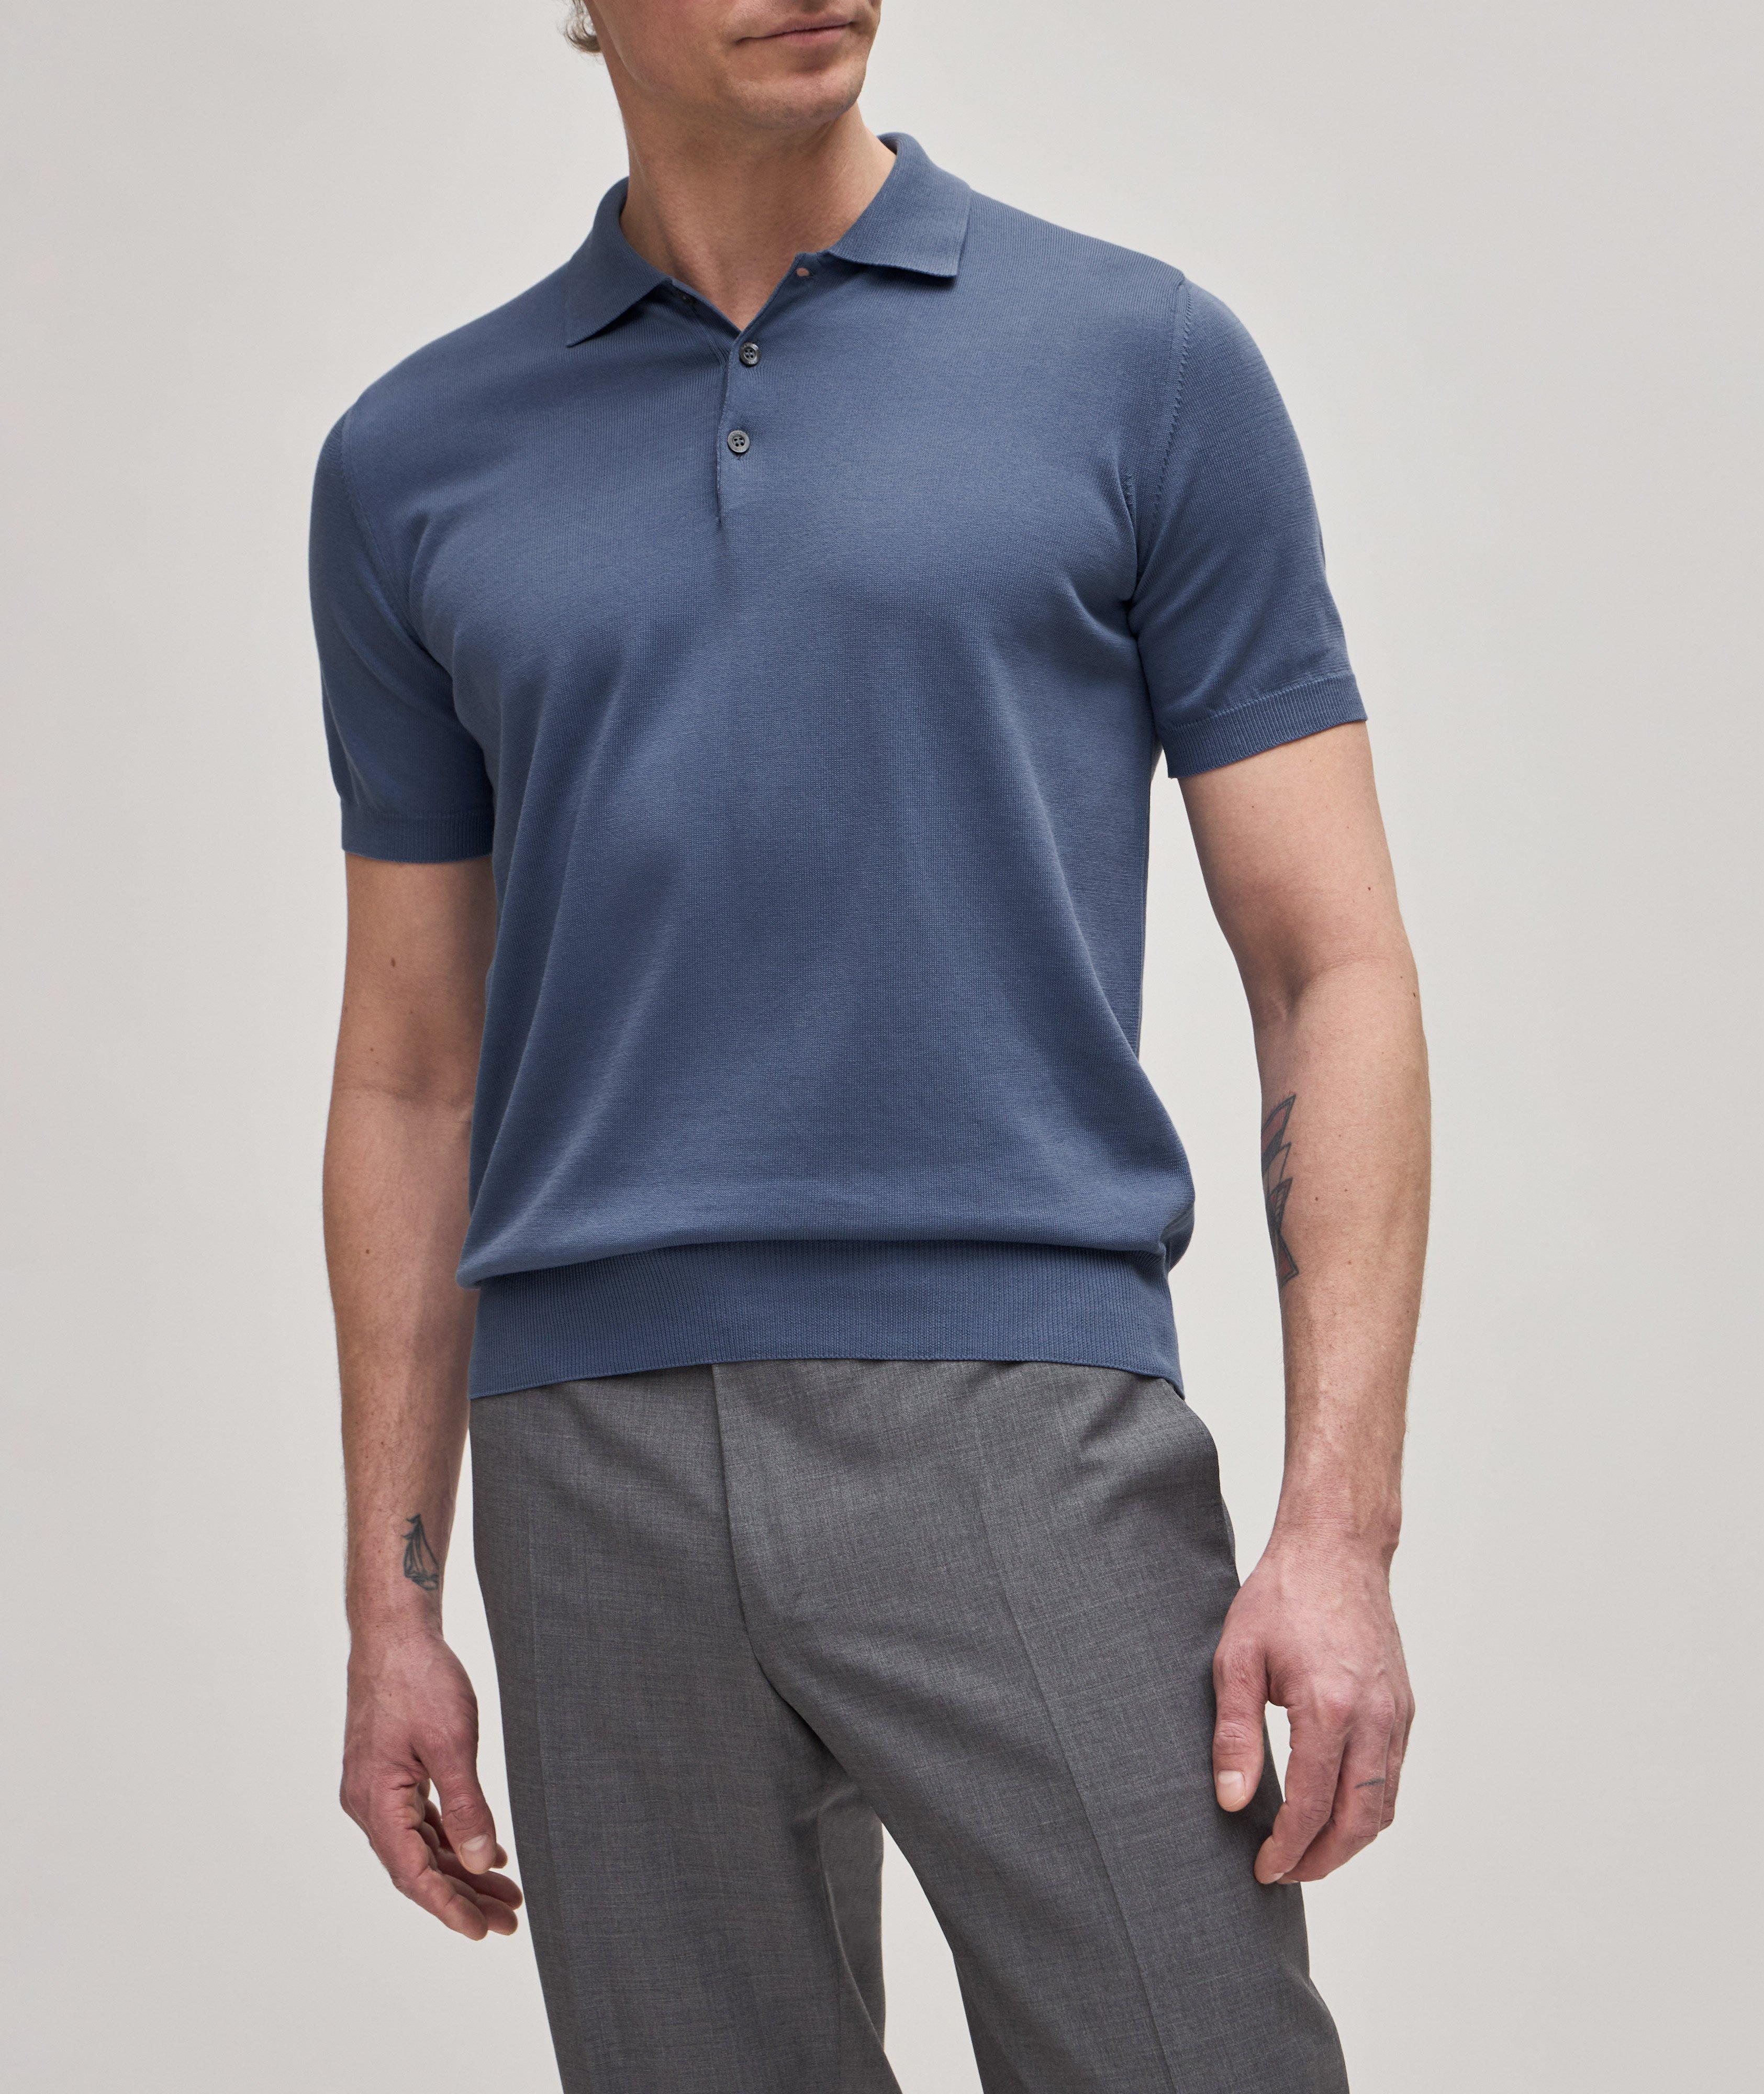 Solid Cotton Knit Polo image 1